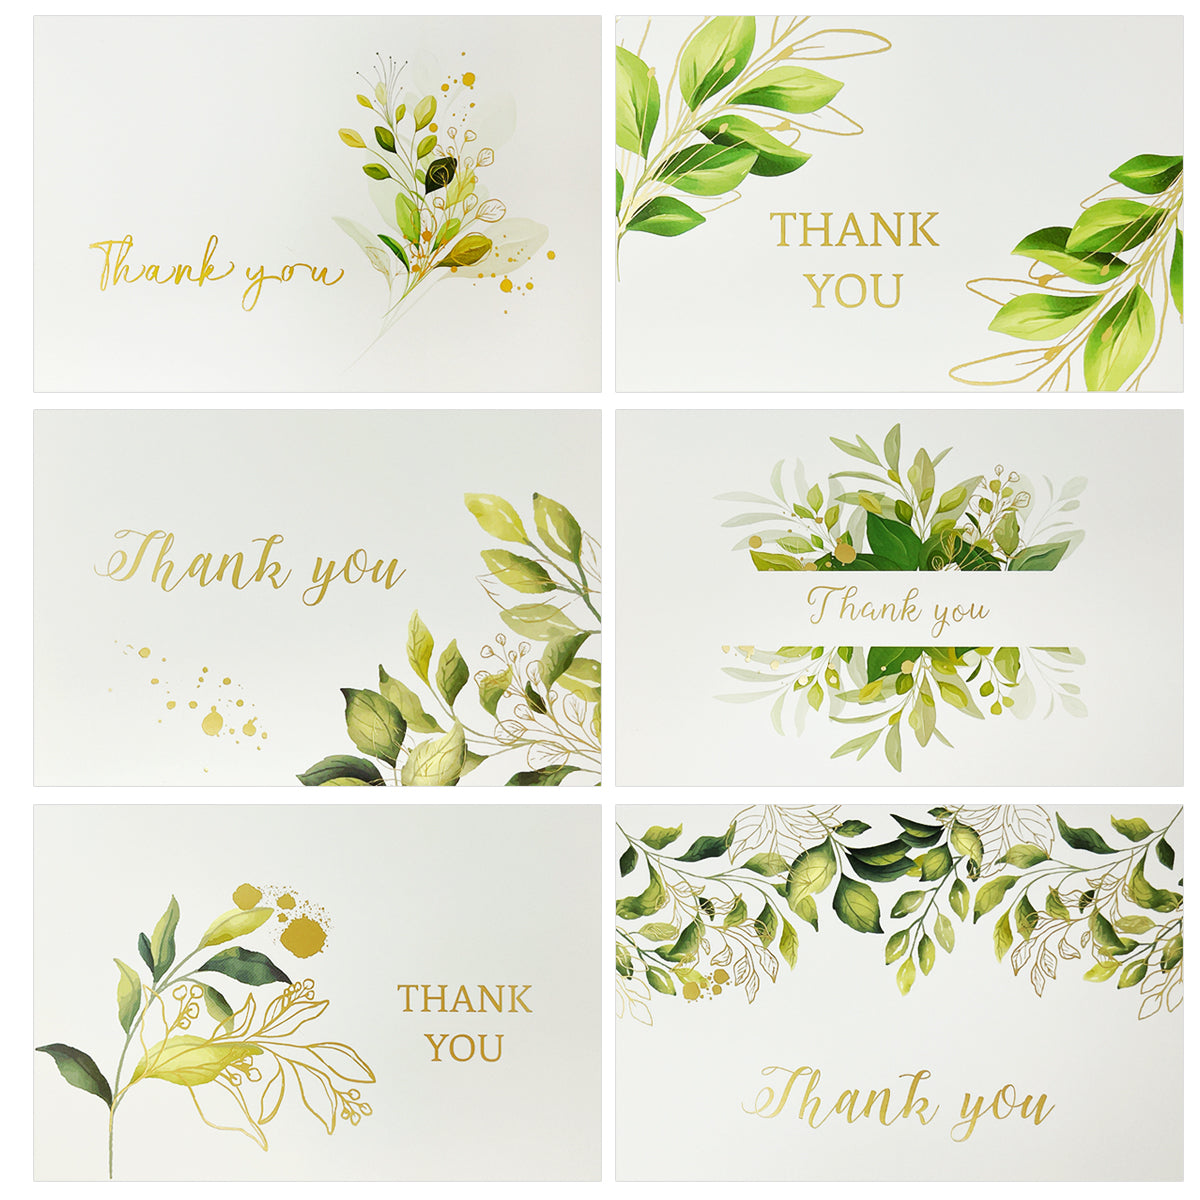 Wrapables Blank Thank You Cards with Envelopes for Weddings, Bridal Showers, Baby Showers (Set of 4)